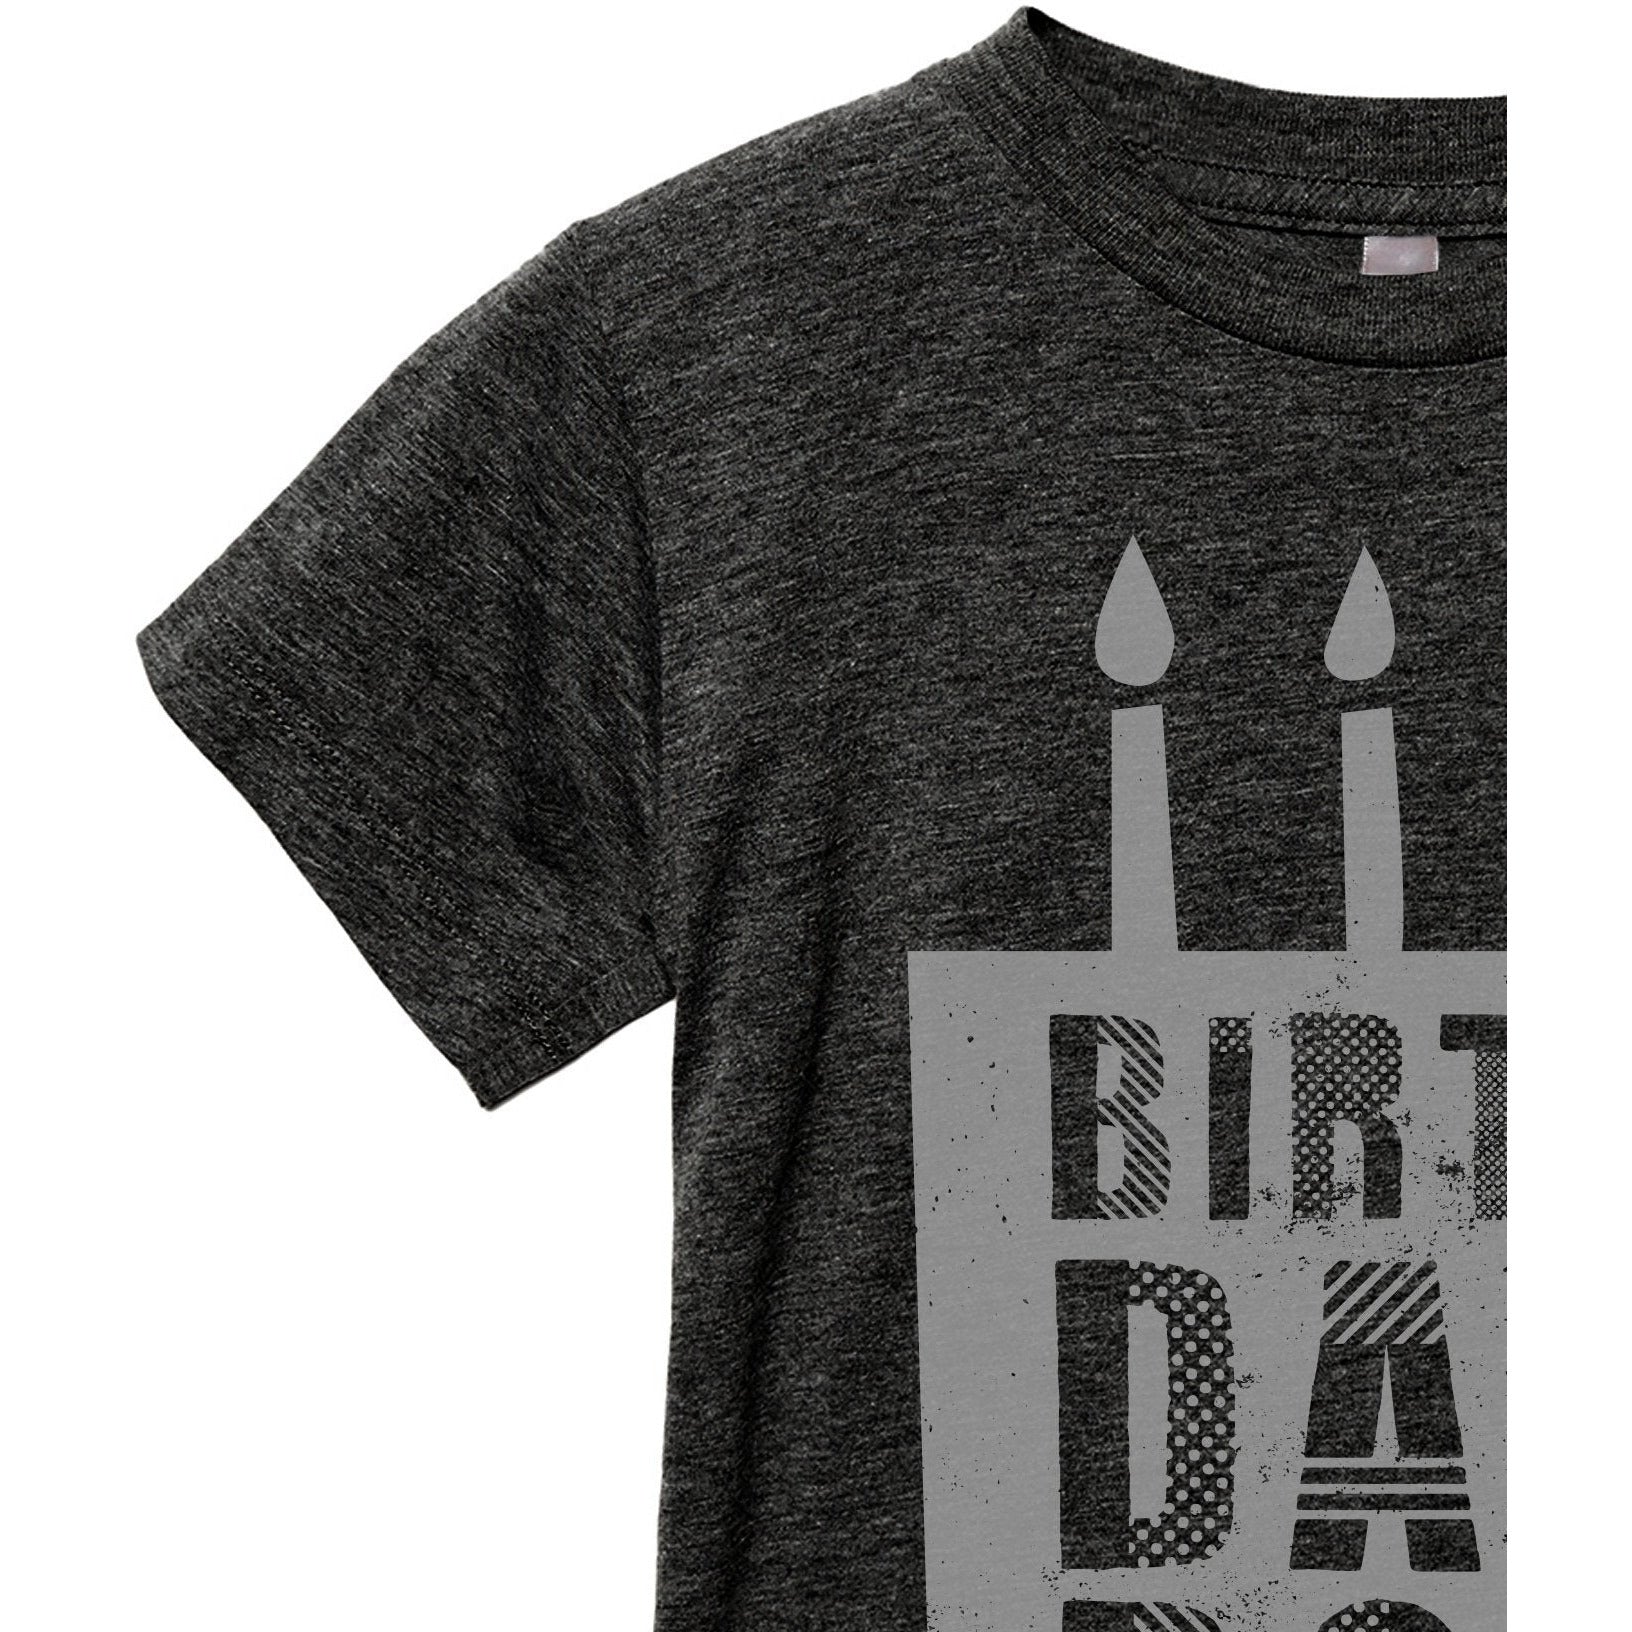 Birthday Boy Toddler's Go-To Crewneck Tee Charcoal Zoom Details A